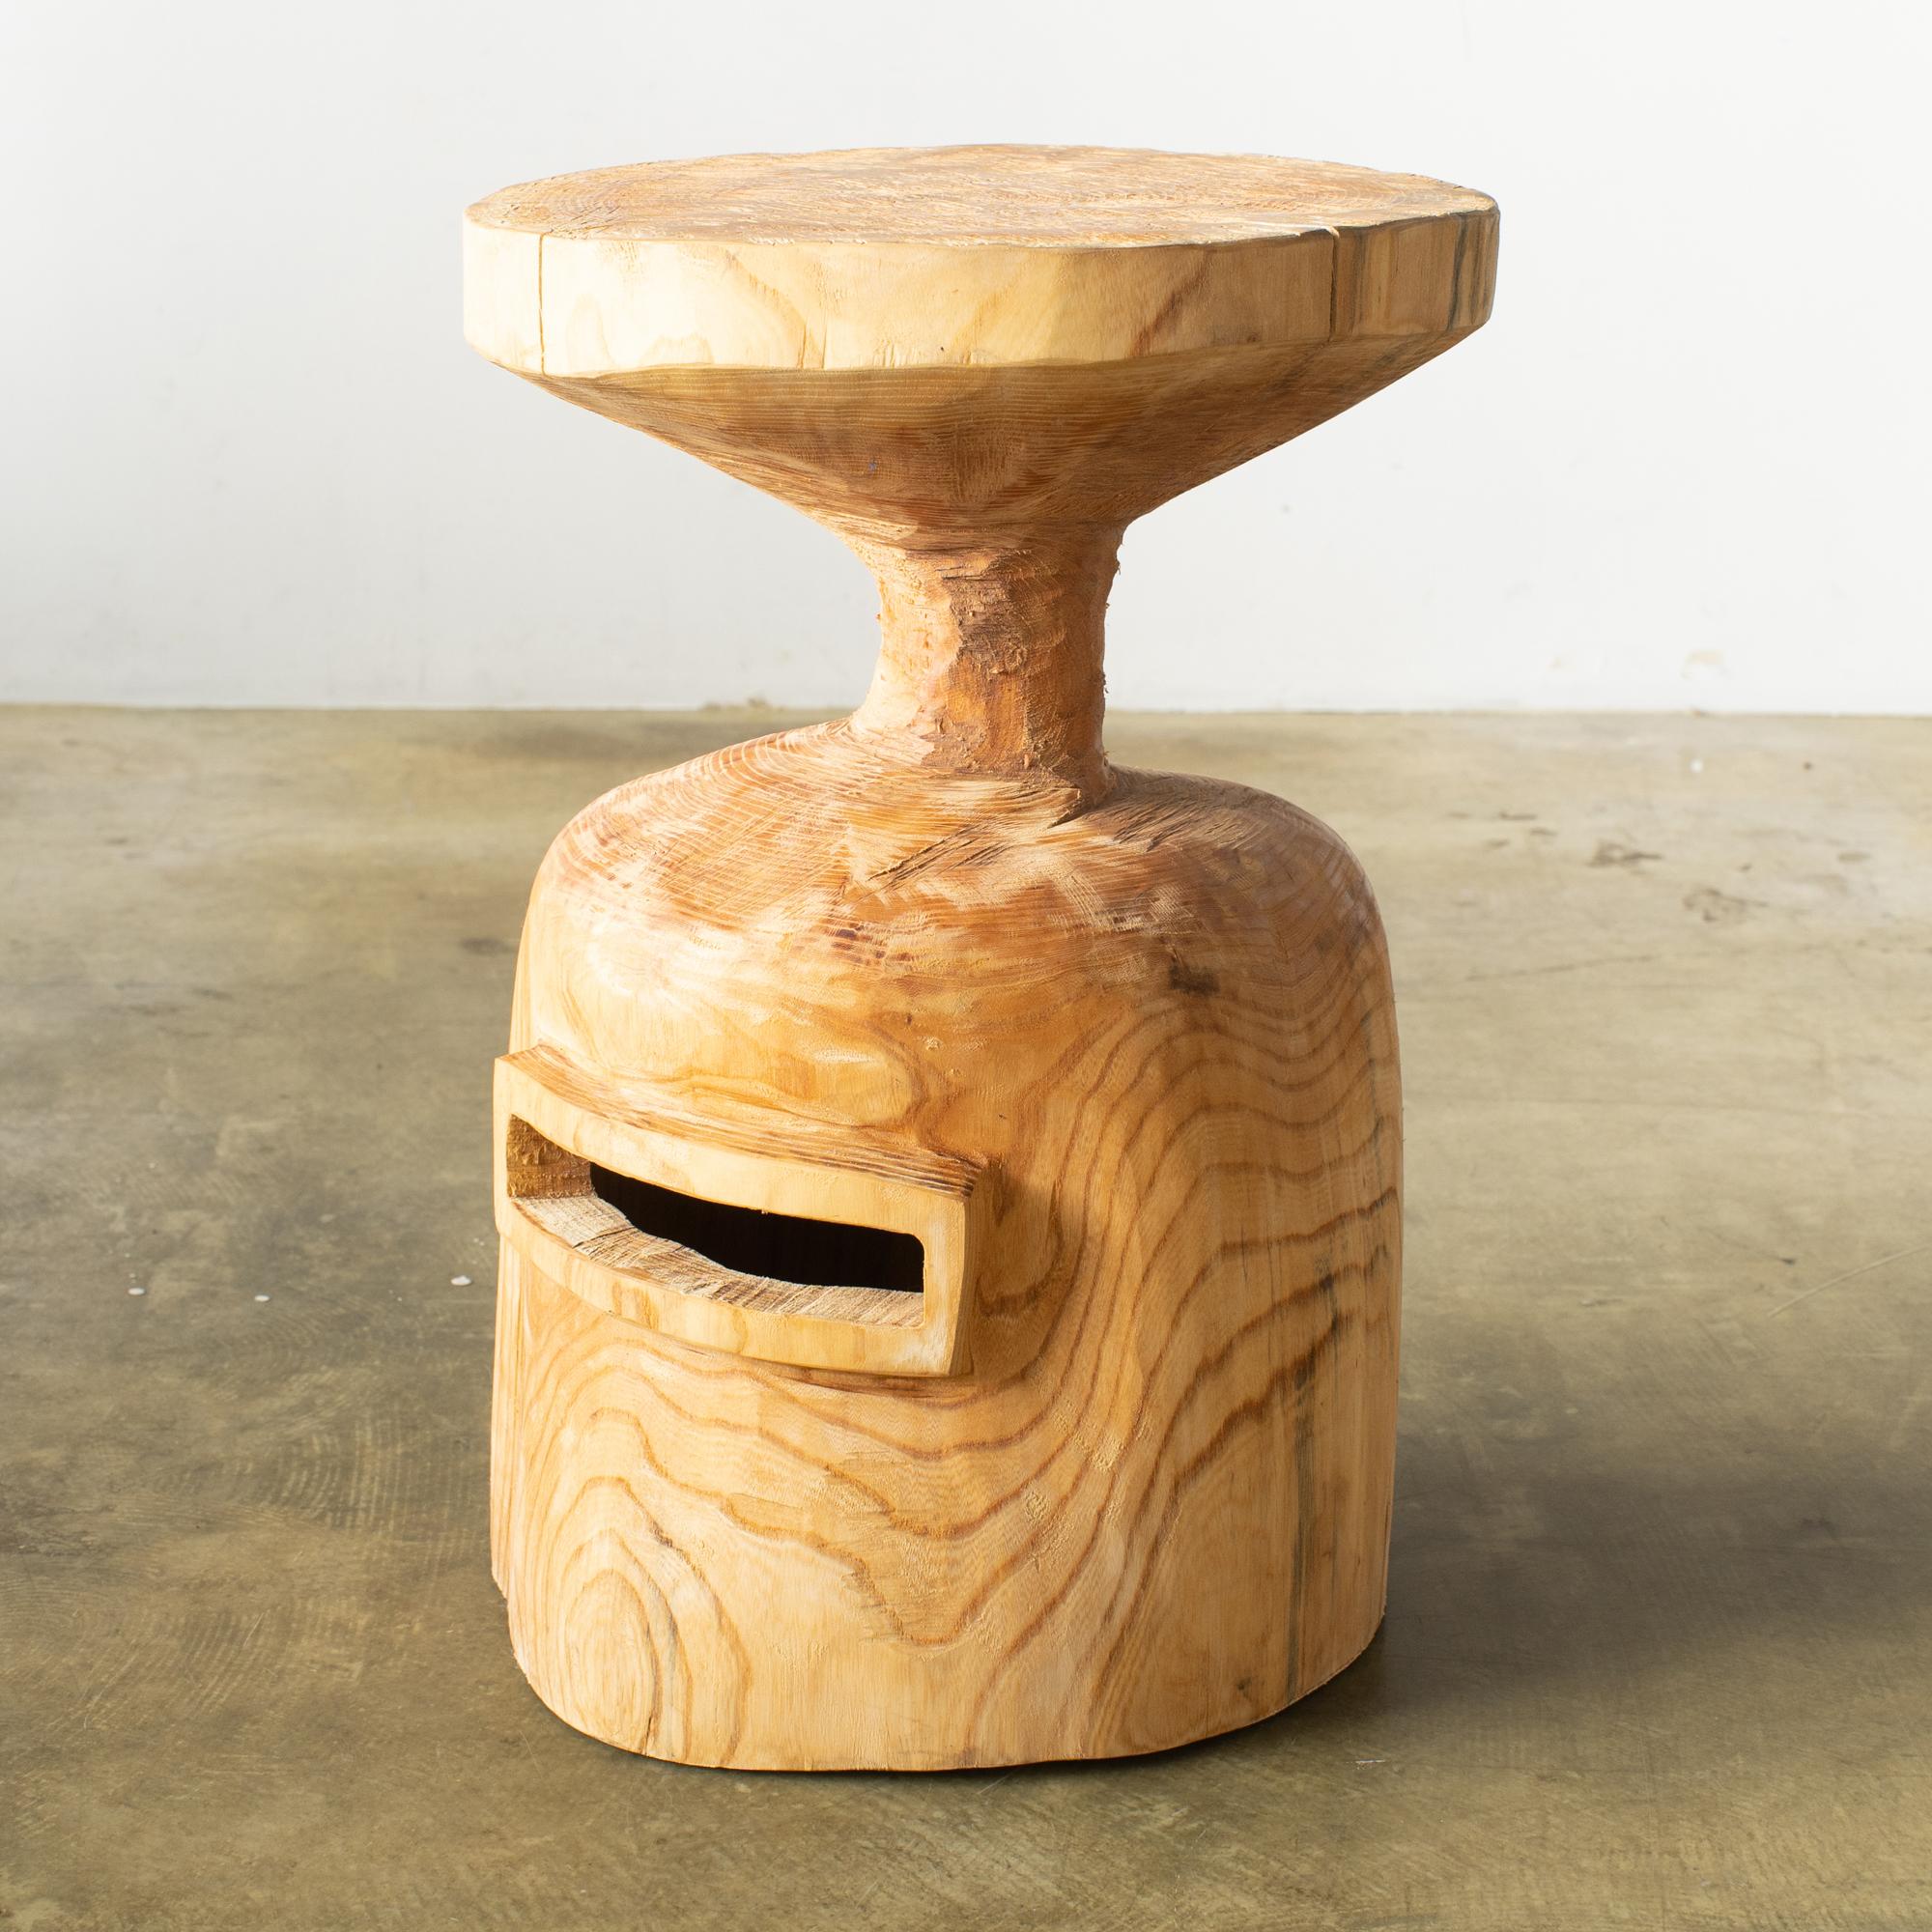 Japanese Hiroyuki Nishimura and Sculptural Wood Stool Side Table 9-07 Tribal Glamping For Sale